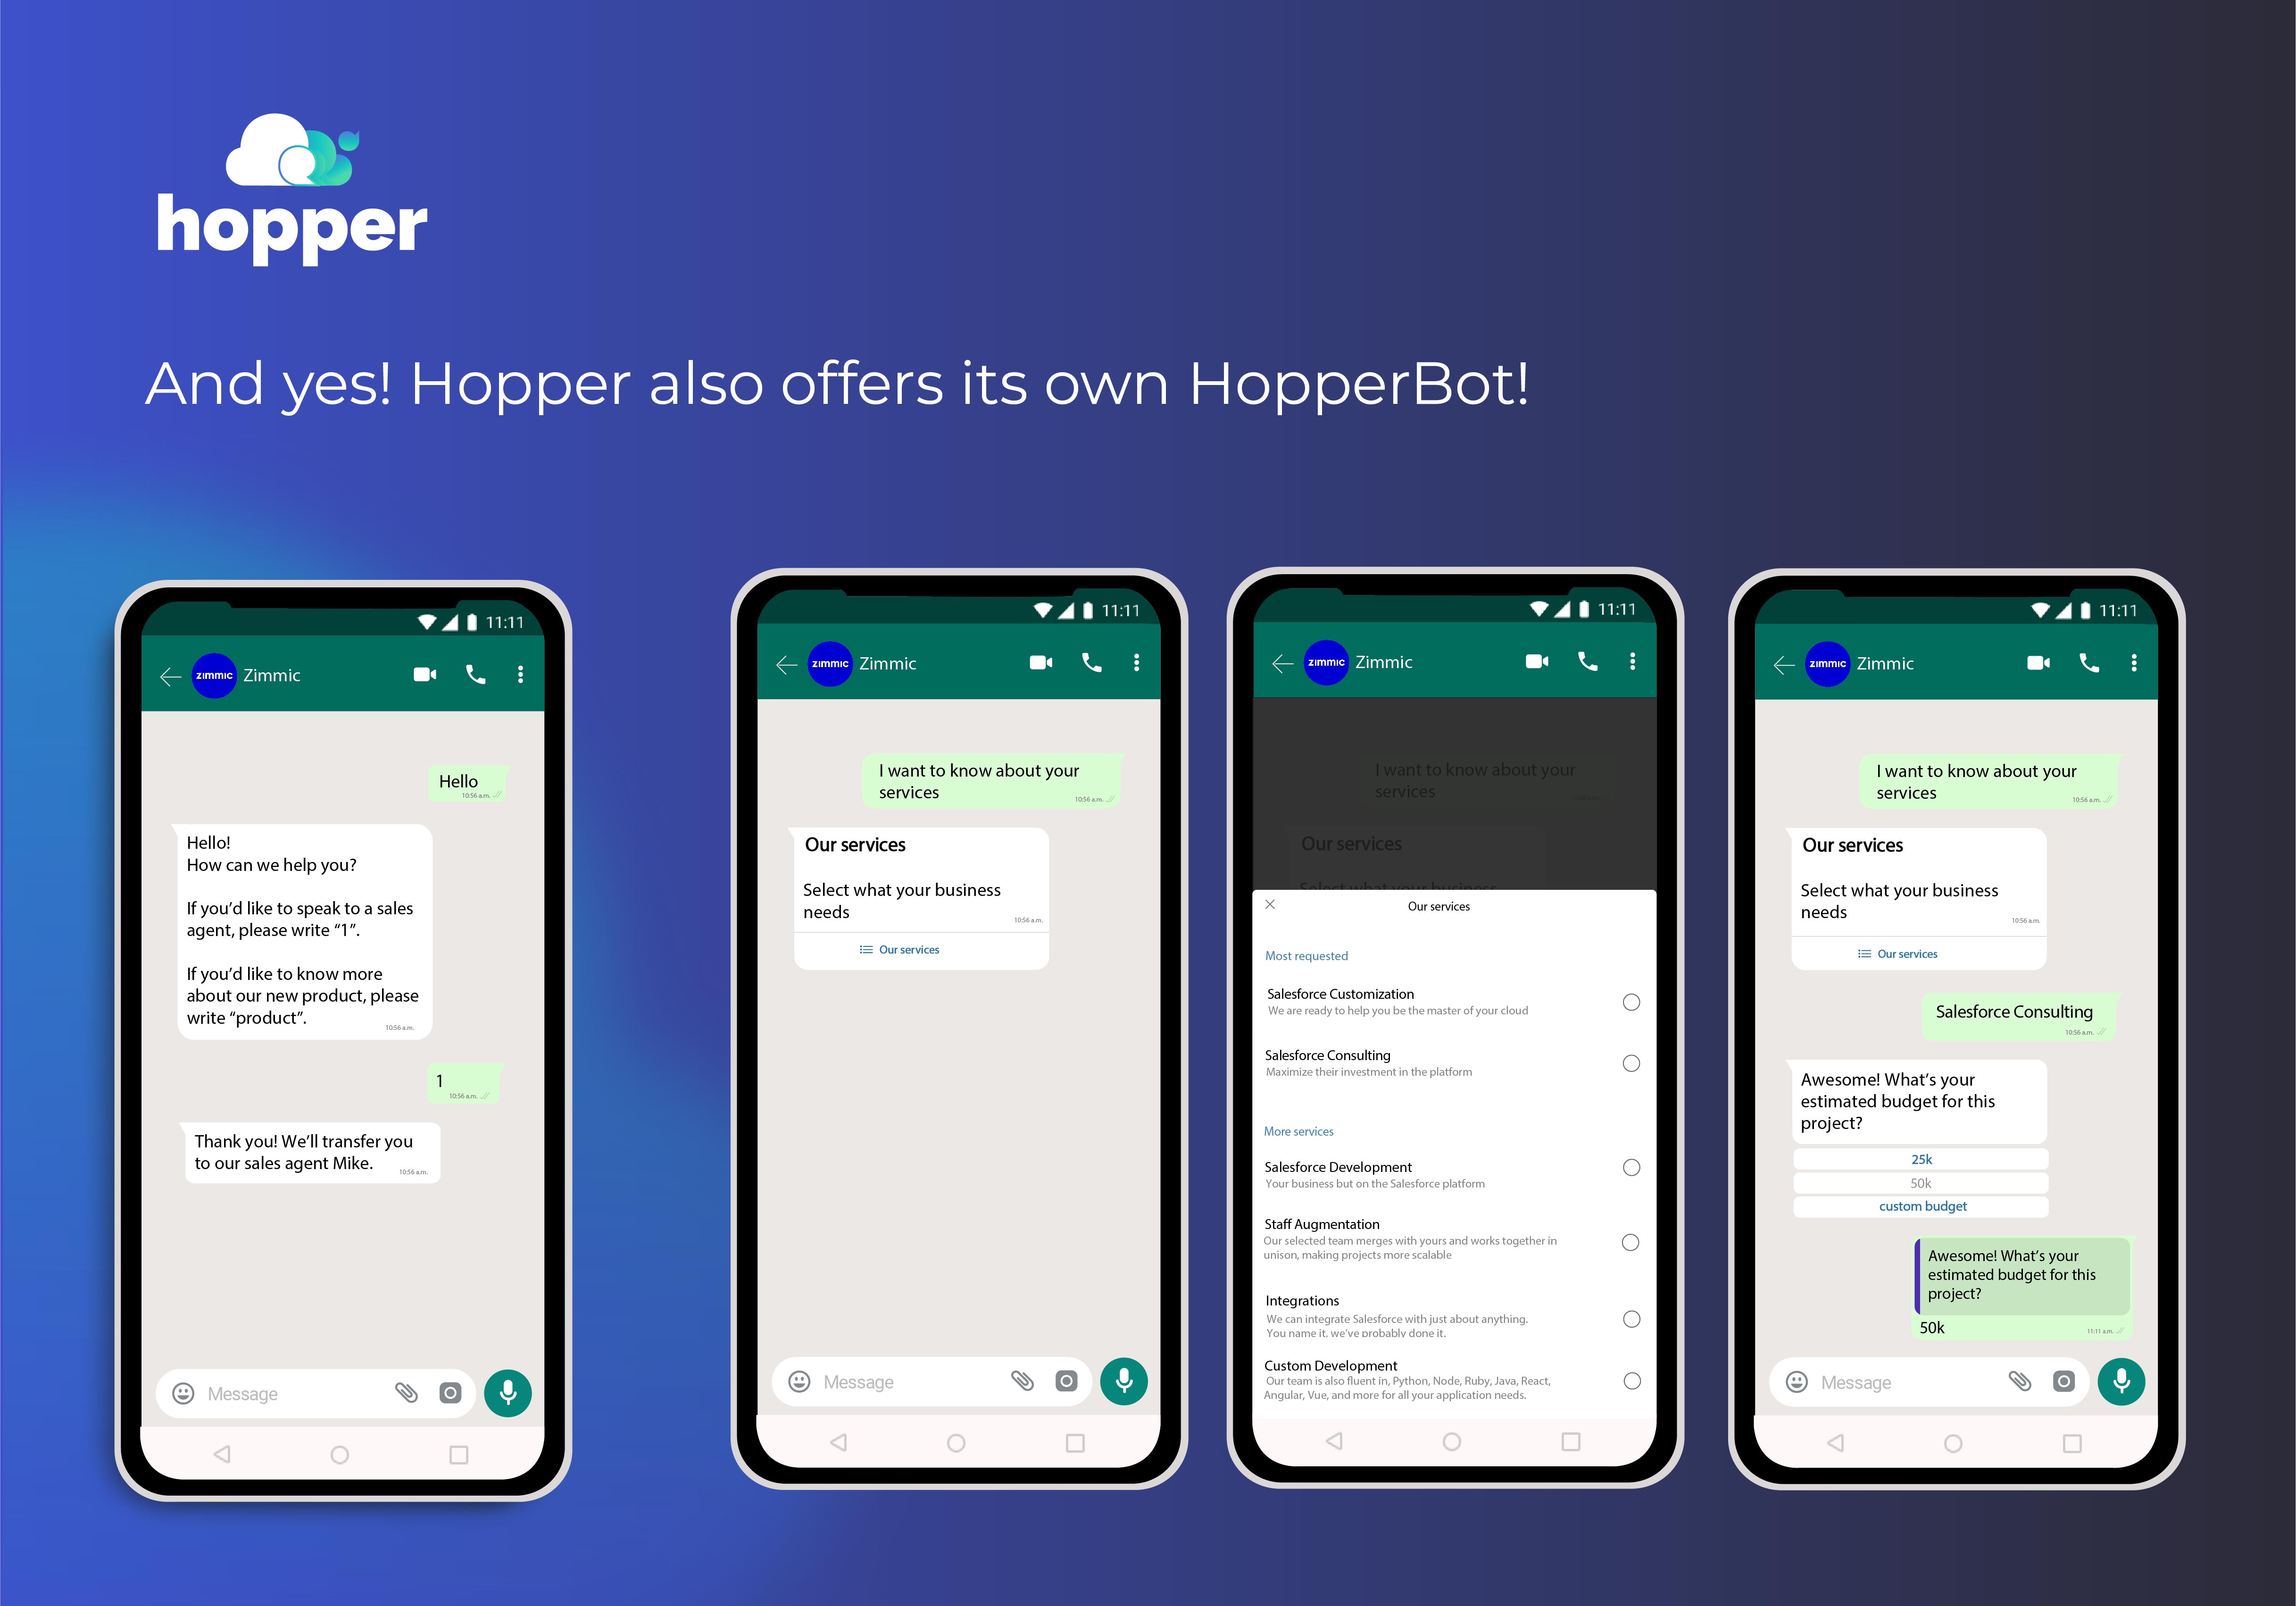 With Hoper Bot, you can provide real-time responses to your customers, freeing up your agents´ time and improving conversion rates.